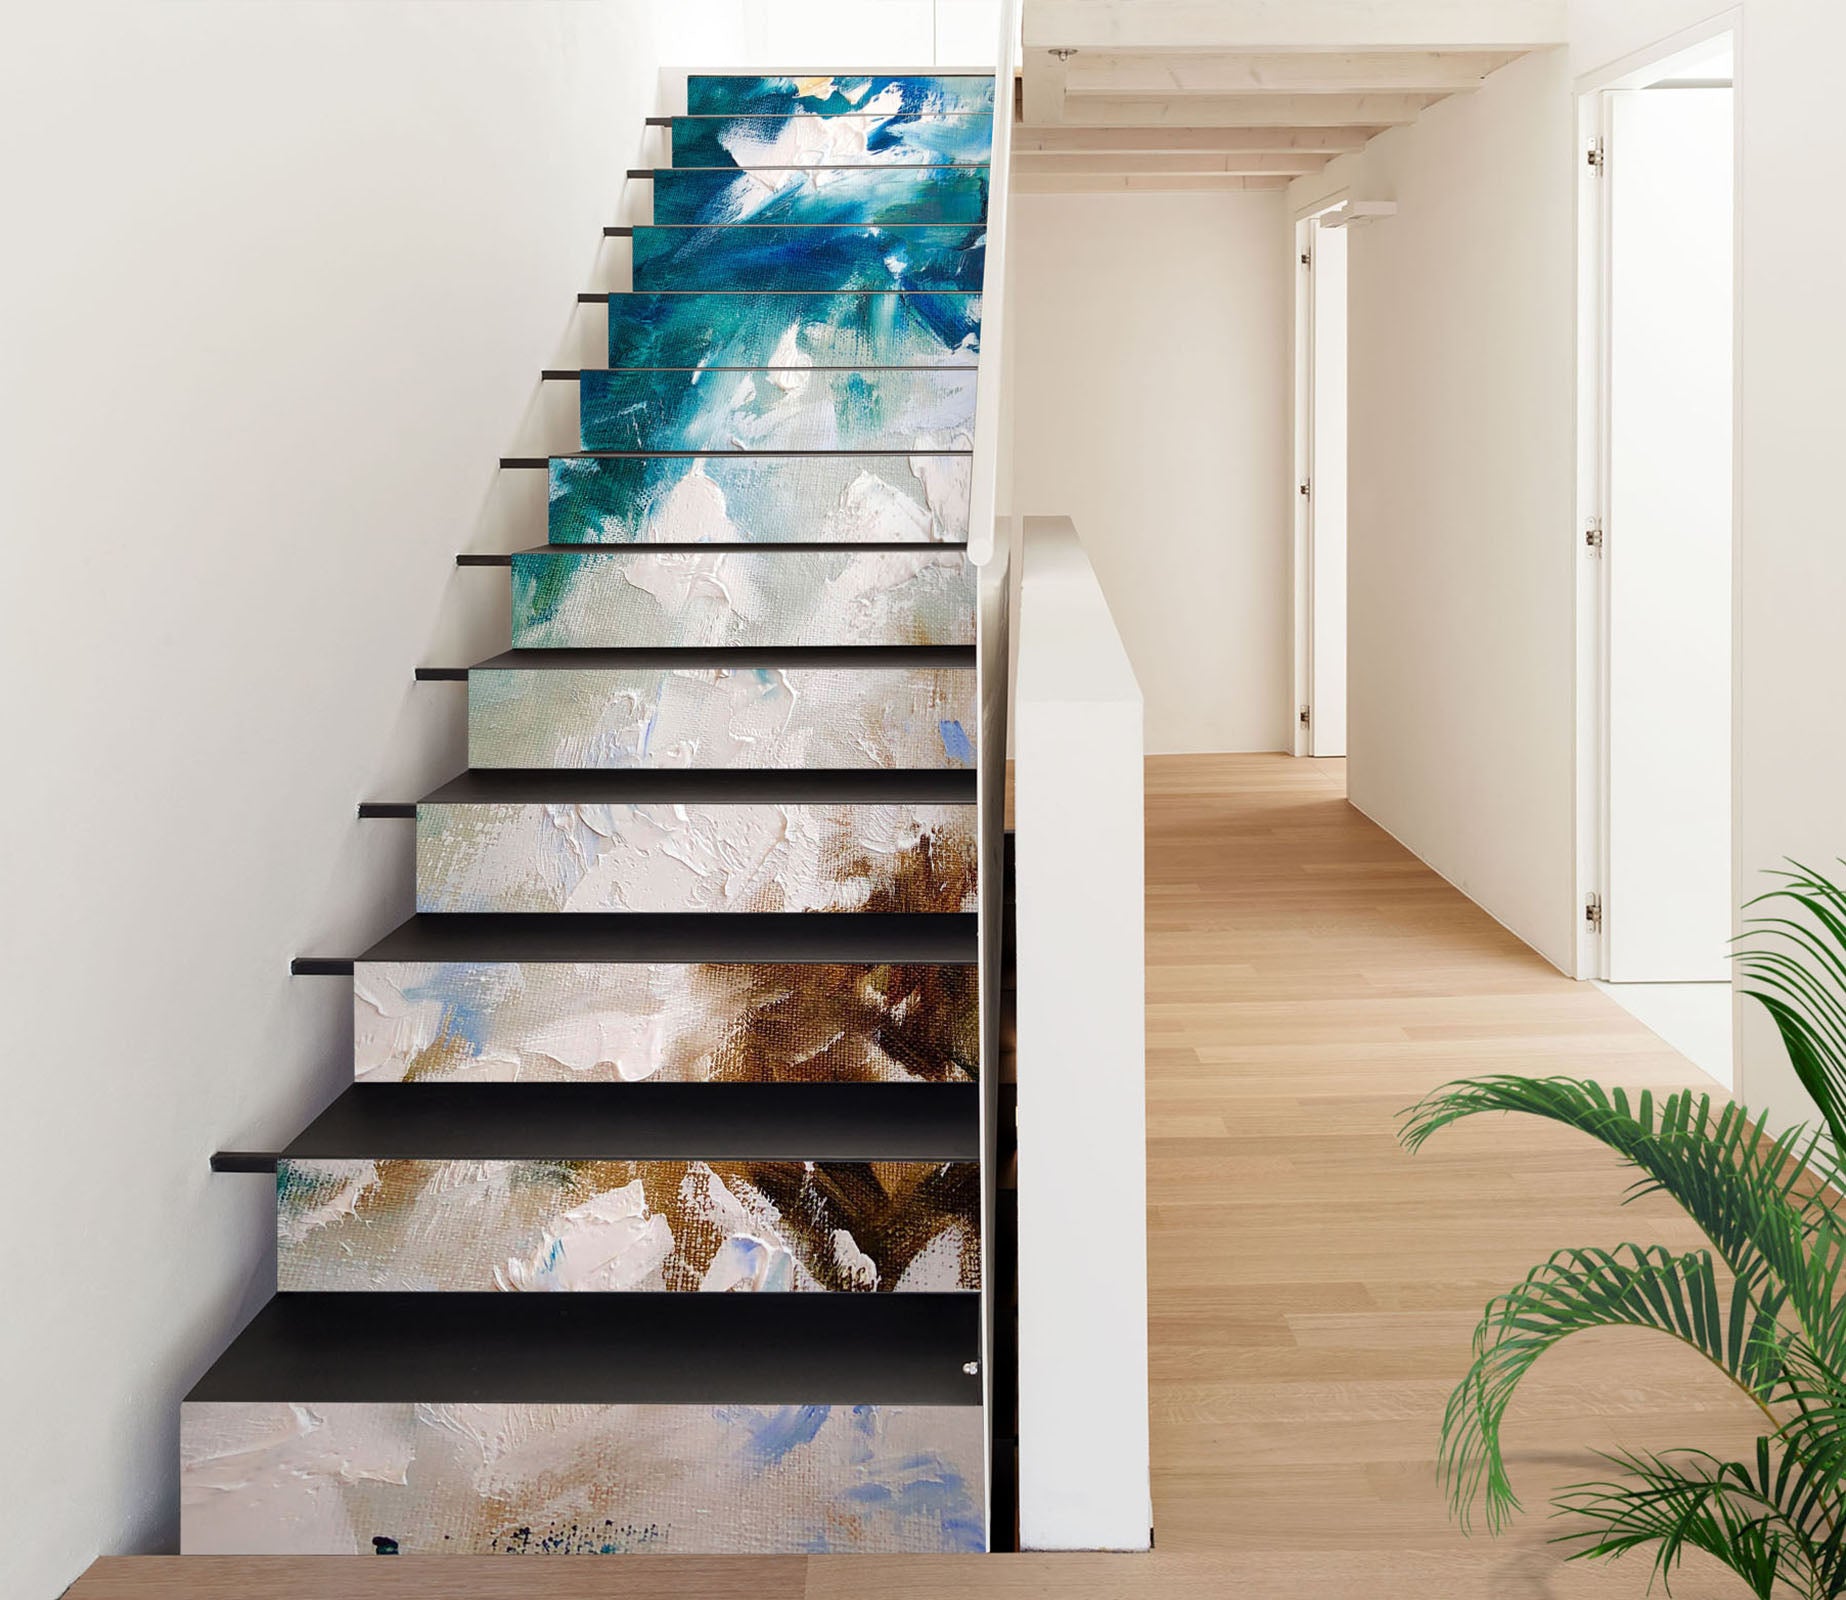 3D Painted Pigments 2206 Skromova Marina Stair Risers